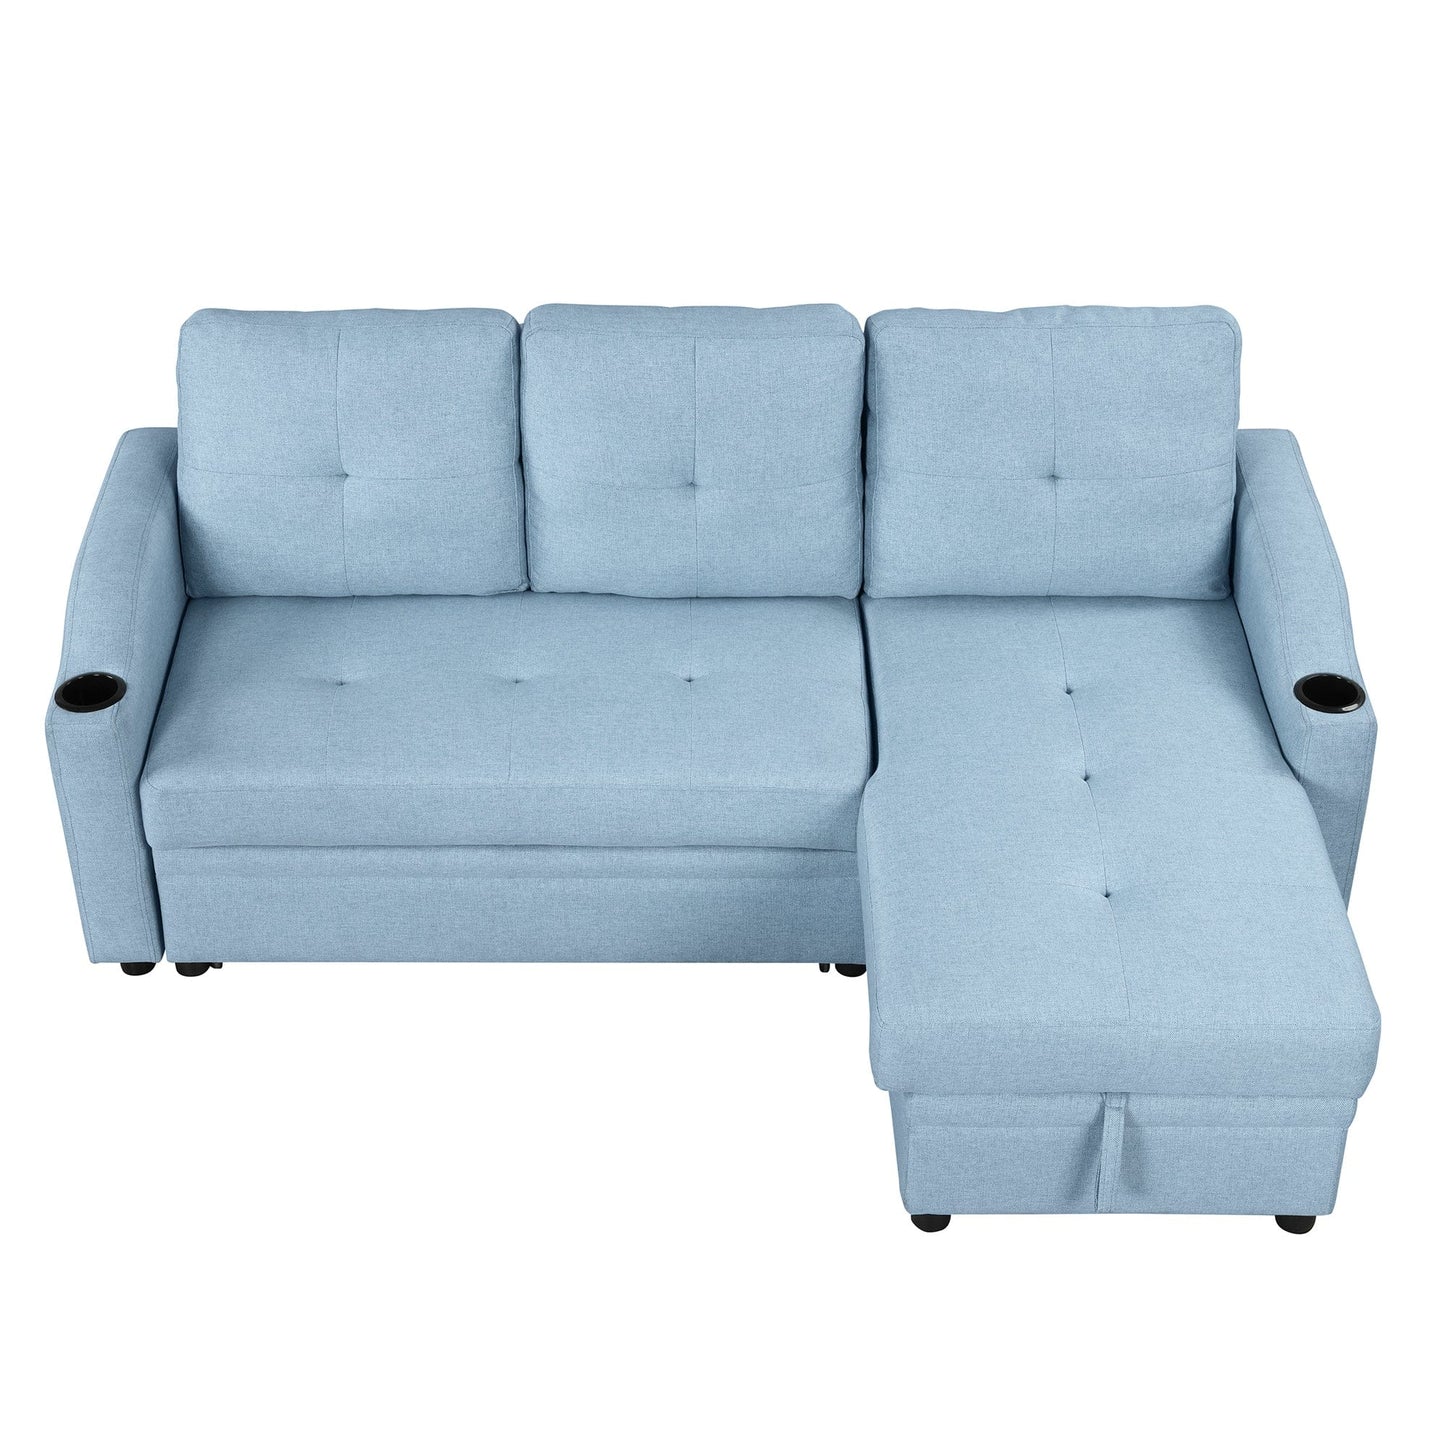 80.3" Orisfur. Pull Out Sofa Bed Modern Padded Upholstered Sofa Bed , Linen Fabric 3 Seater Couch with Storage Chaise and Cup Holder , Small Couch for Small Spaces